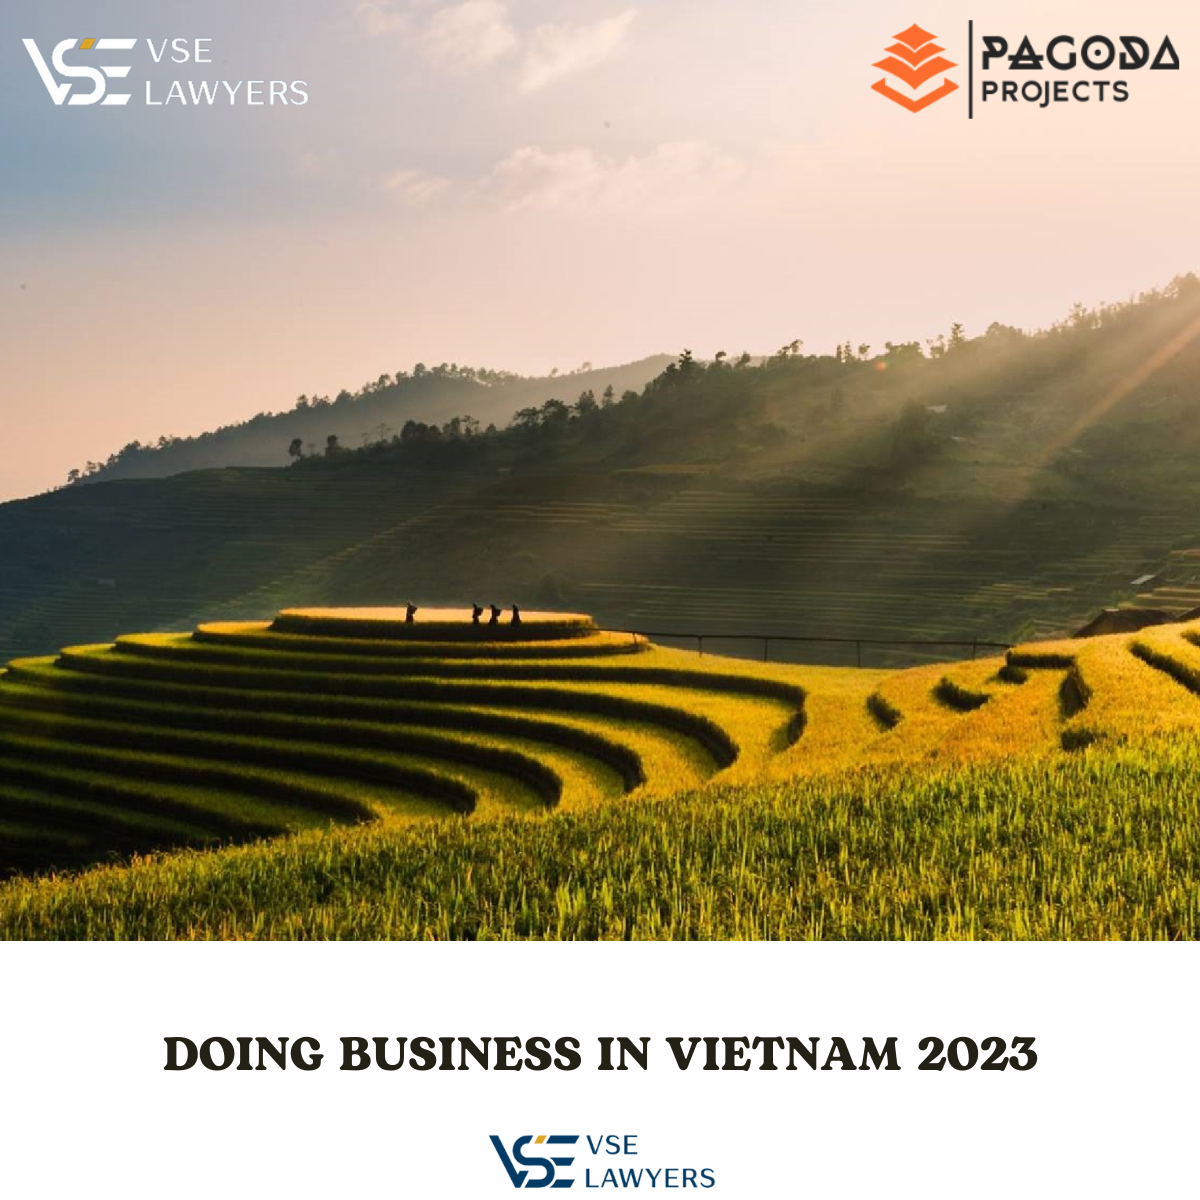 Q&A: DOING BUSINESS - HOW TO START A BUSINESS IN VIETNAM?